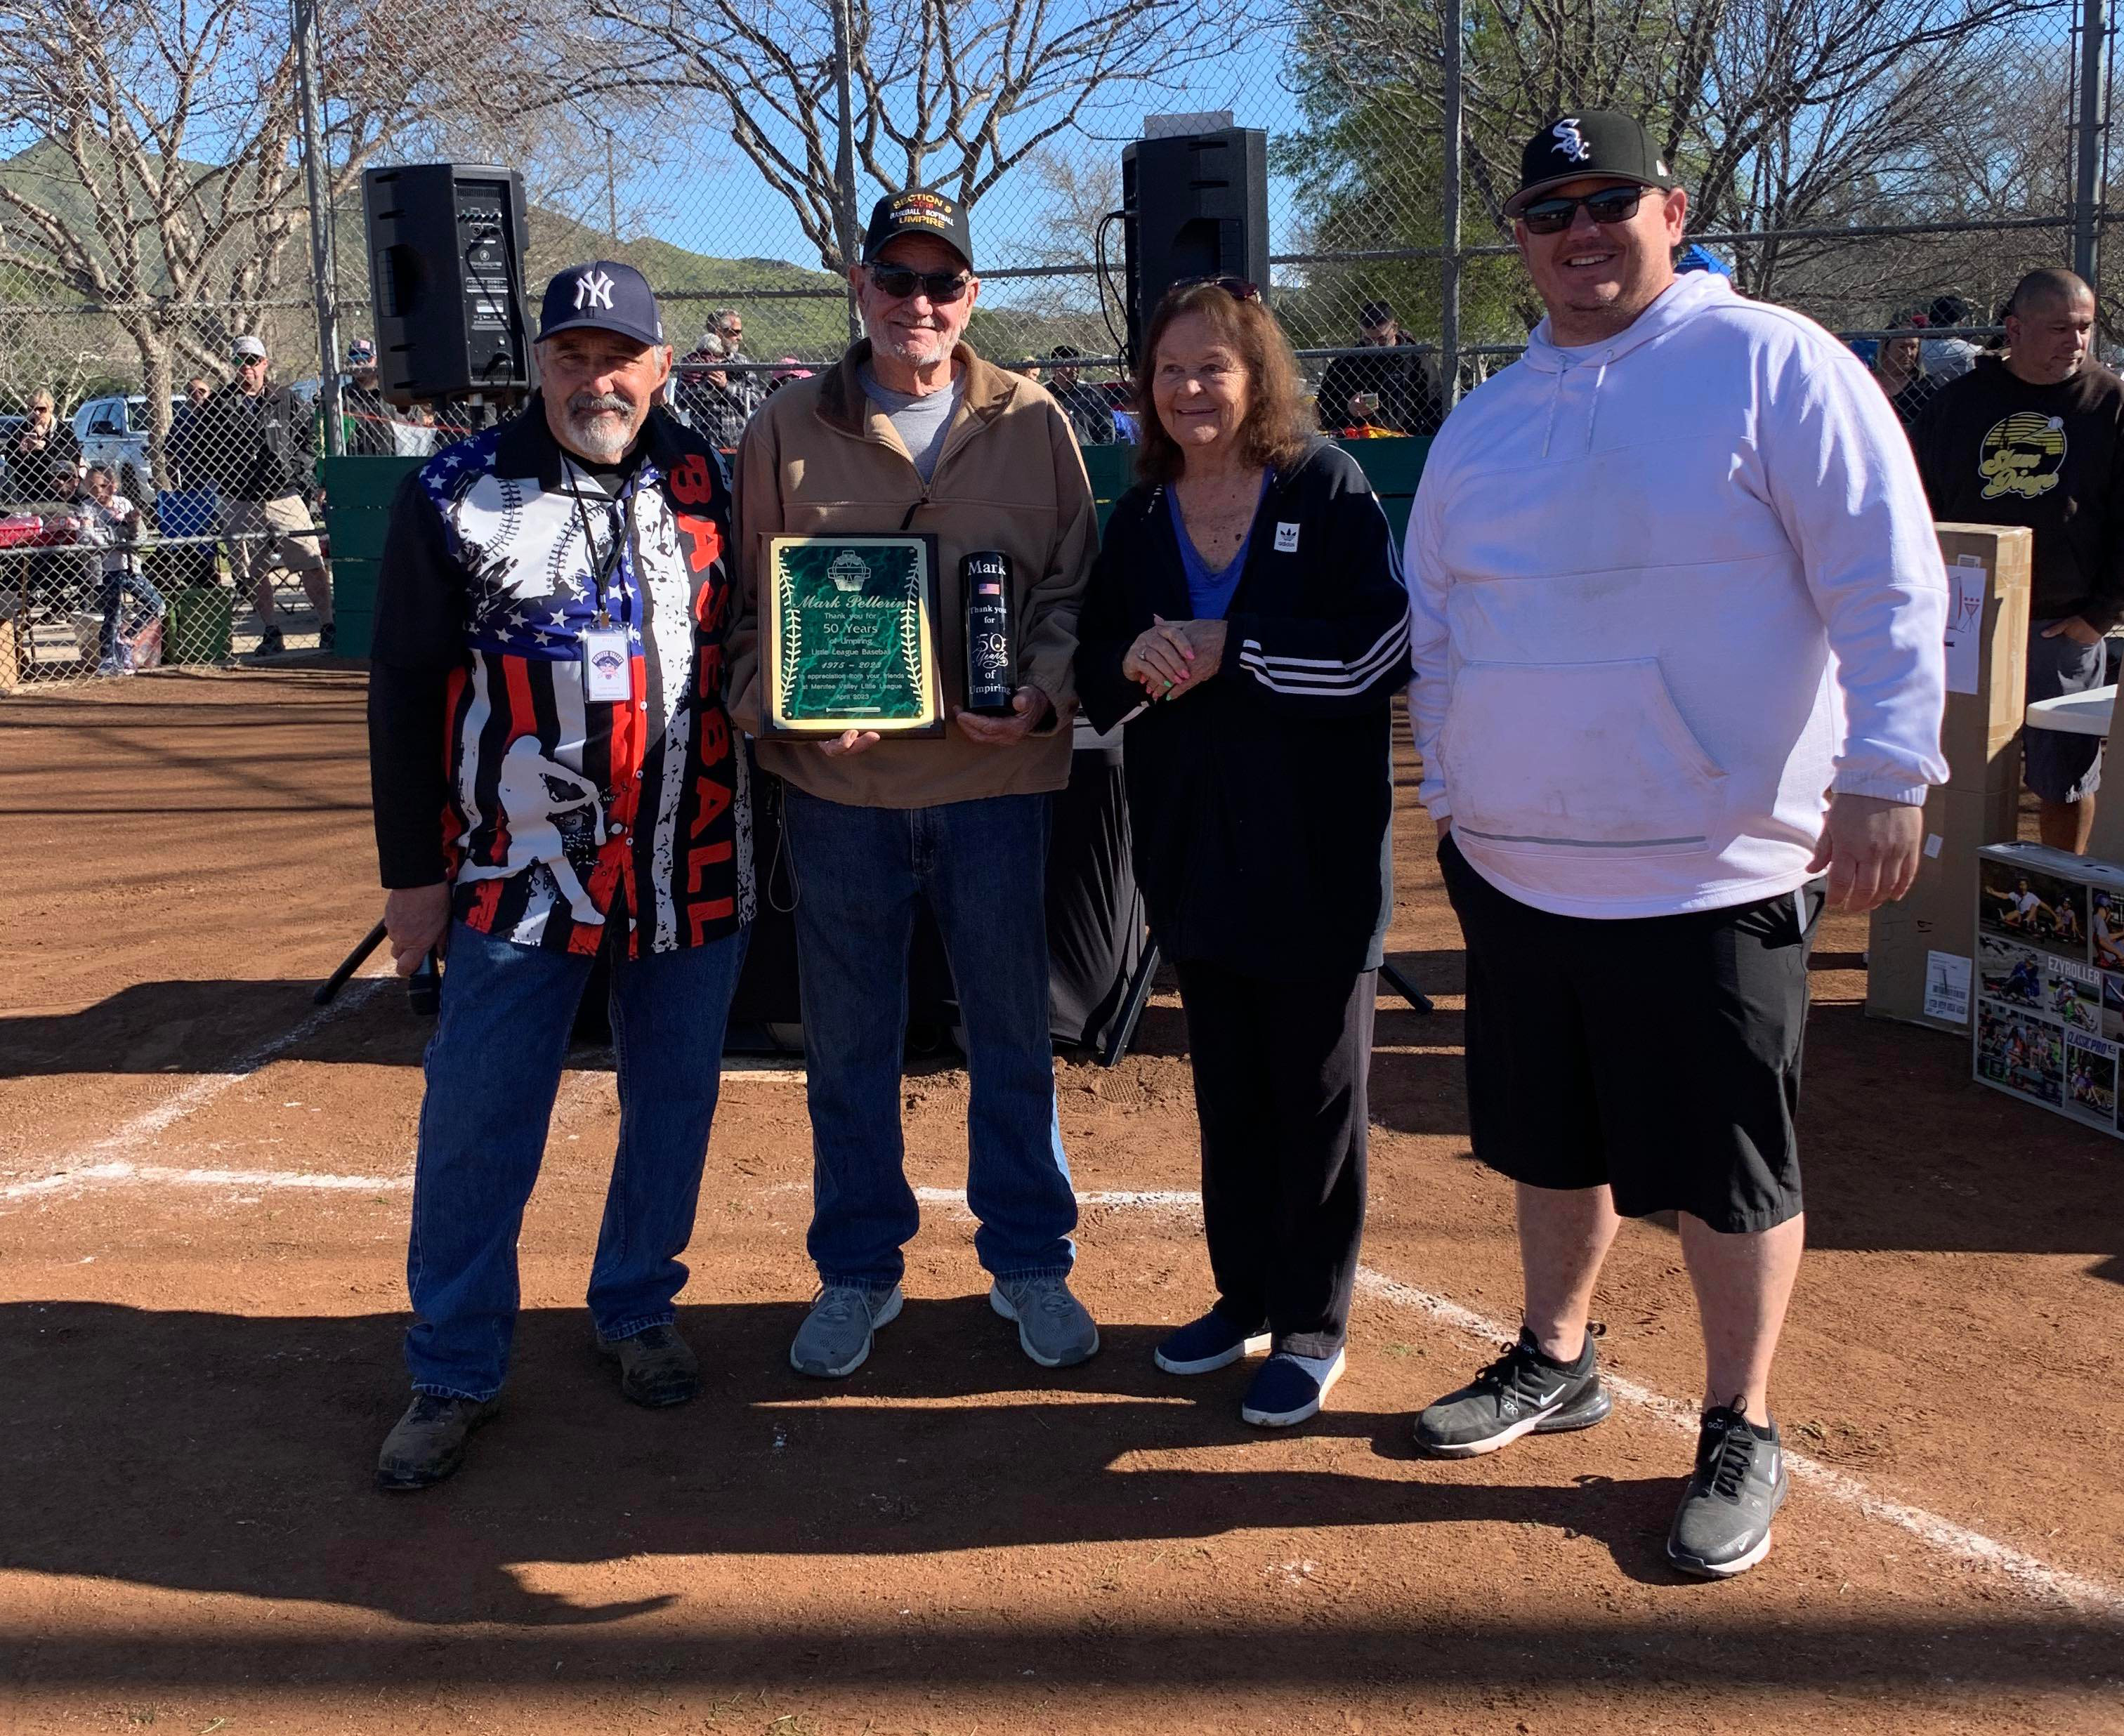 Longtime umpire honored on Little Leagues Opening Day Menifee 24/7